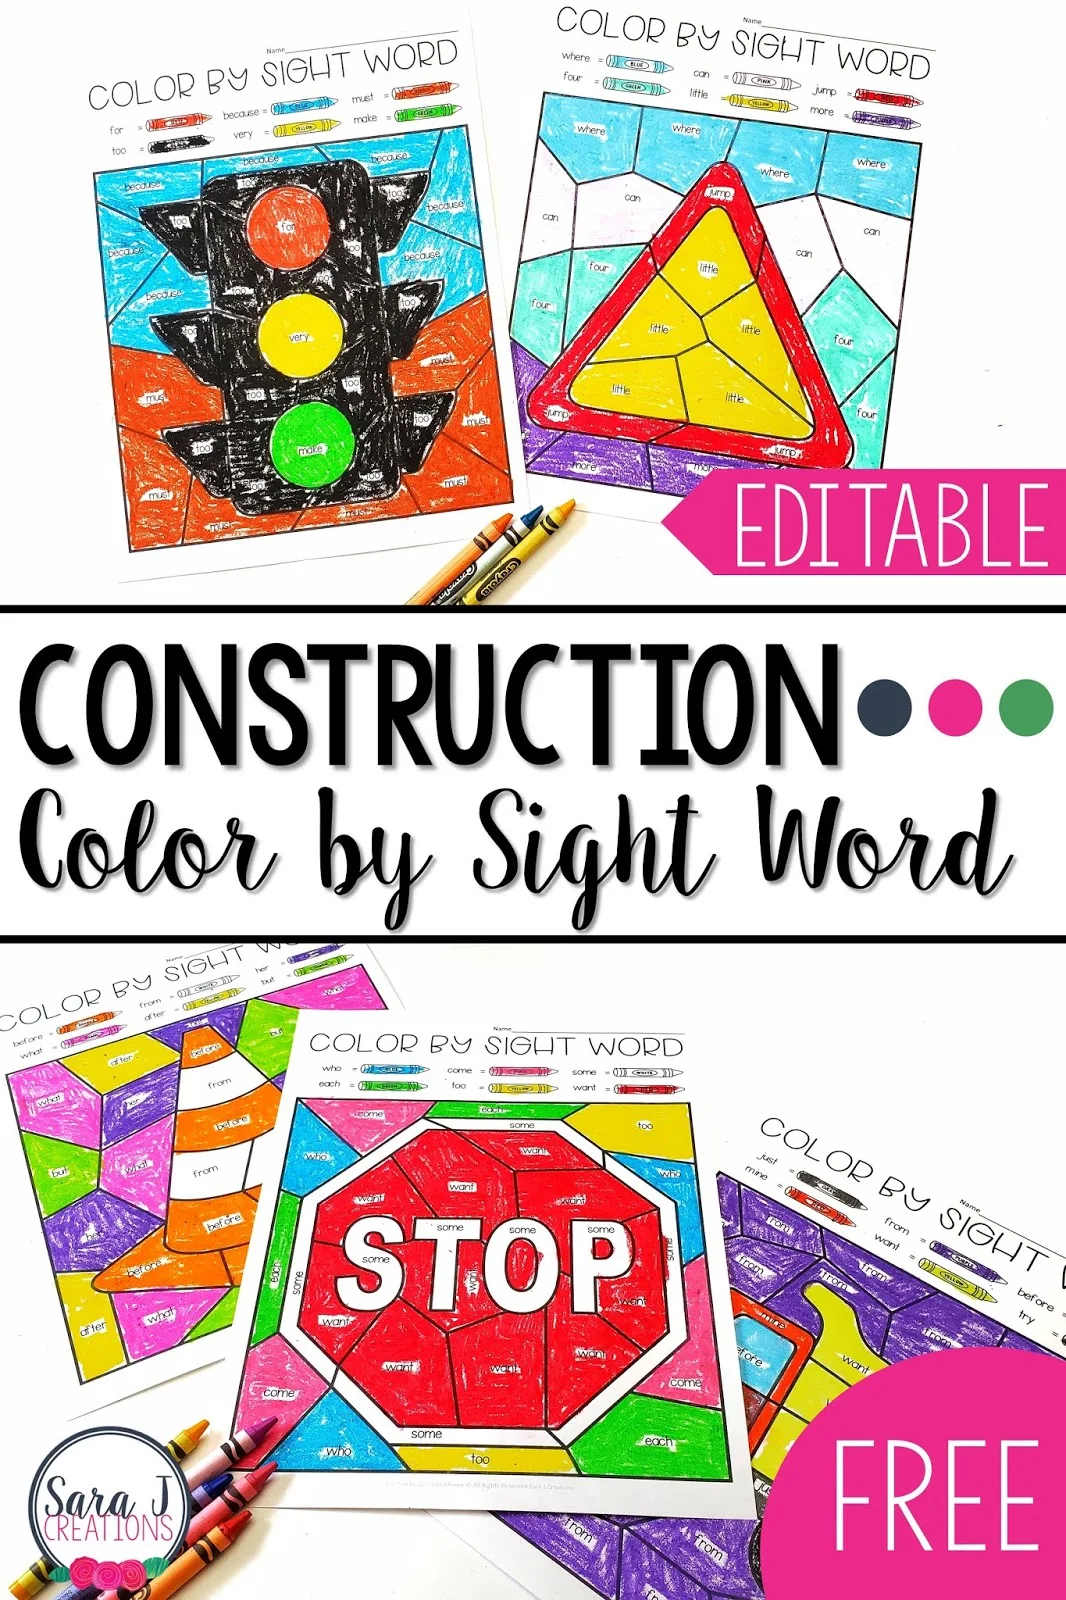 Construction Color by Sight Word Editable Coloring Pages. These construction themed sight word worksheets are editable so you can type in the exact words you want your students to practice. How awesome?! Grab these free printables to use with your kindergarten, first grade, or second grade class. Don't miss out on this fun freebie and the other construction freebies that are shared in this post.